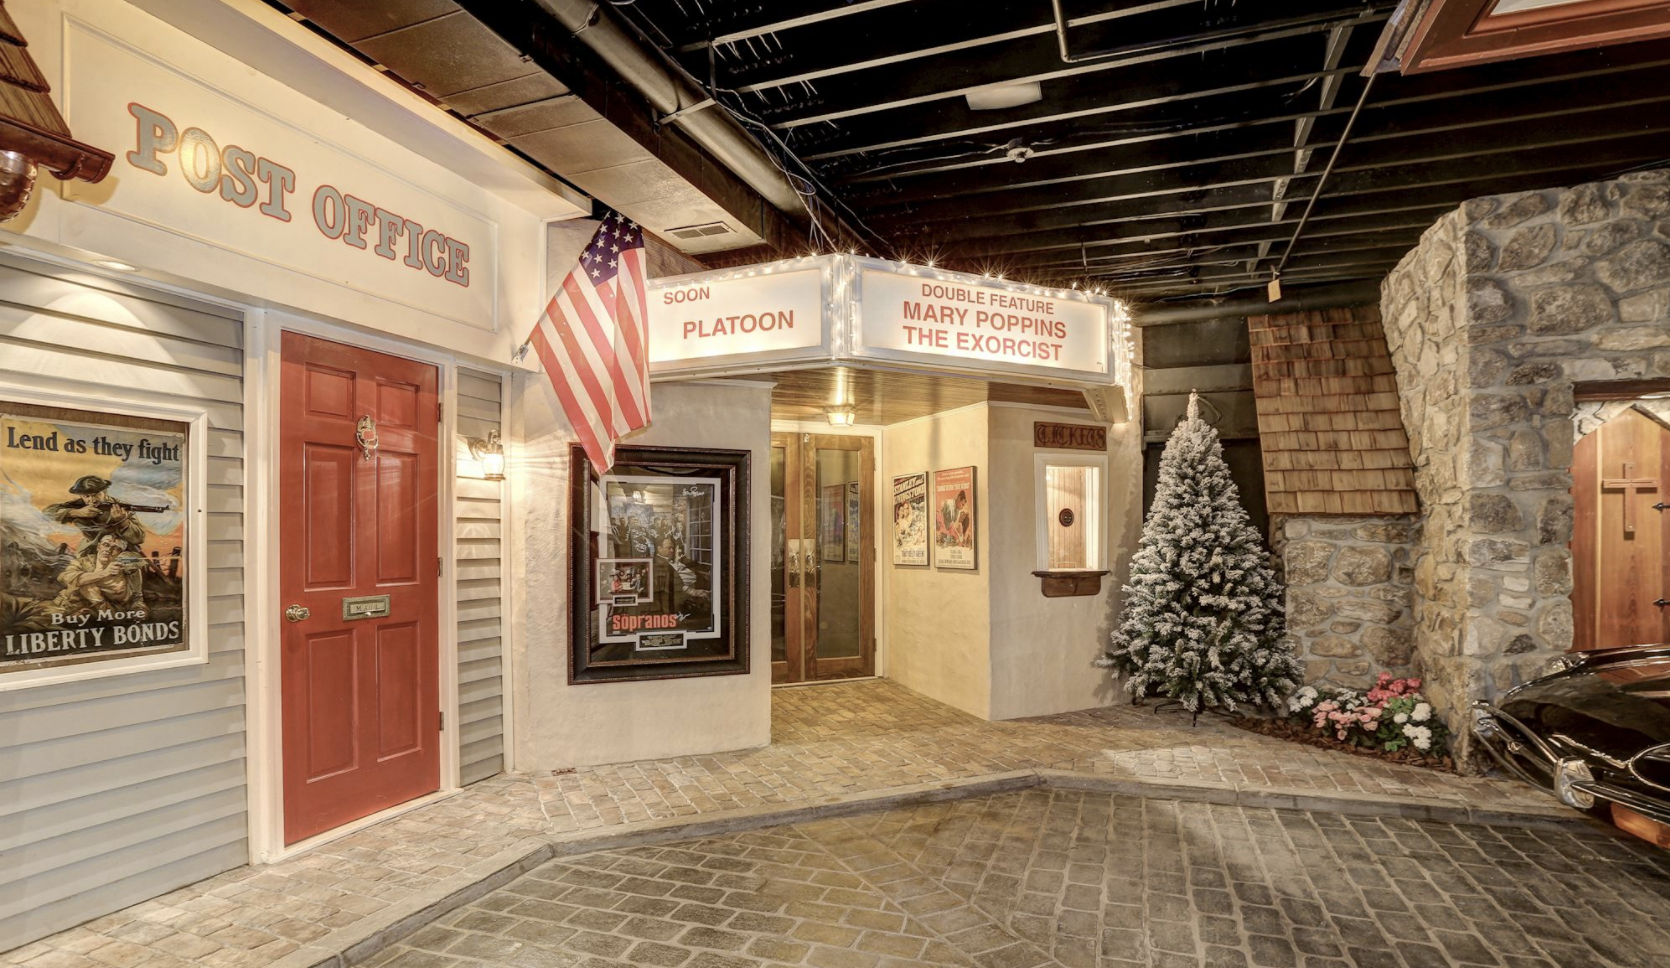 There’s A Life-Sized Fake Town Complete With Real Cars In This Mansion’s Basement